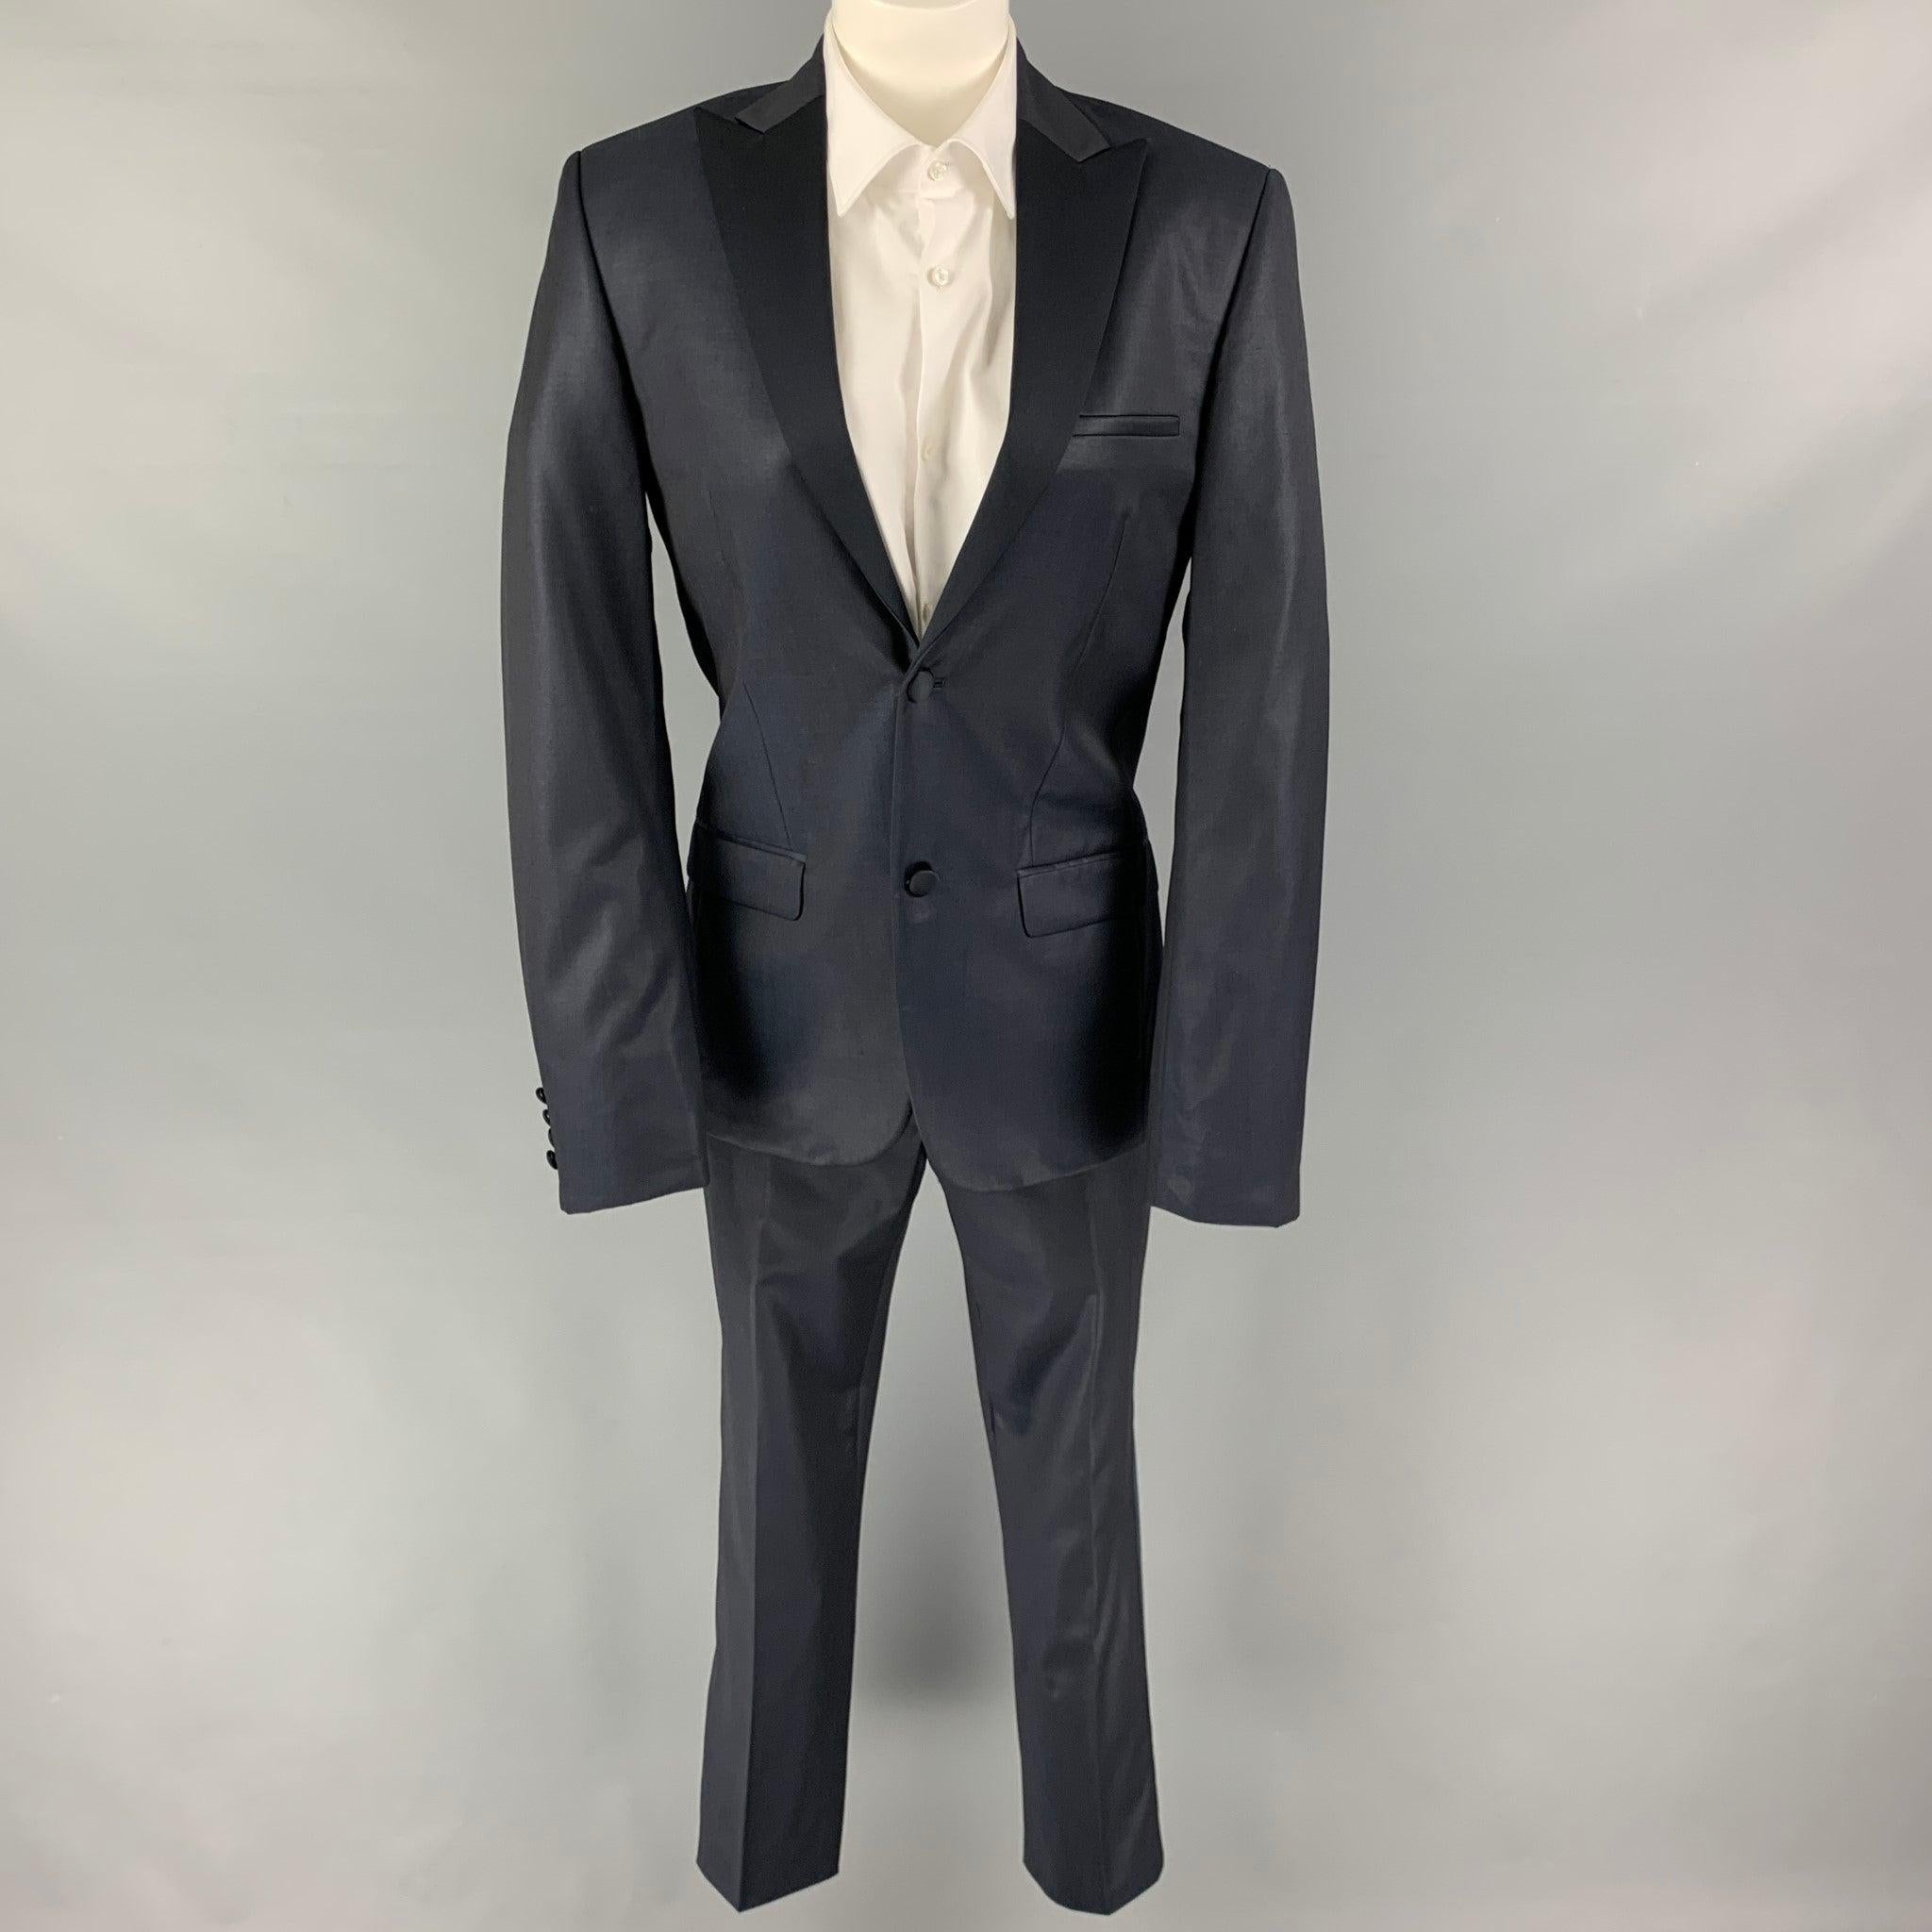 CALVIN KLEIN COLLECTION
suit comes in a navy & black wool with a full liner and includes a single breasted, double button sport coat with a peak lapel and matching flat front trousers. Excellent Pre-Owned Condition. 

Marked:   44/34 

Measurements: